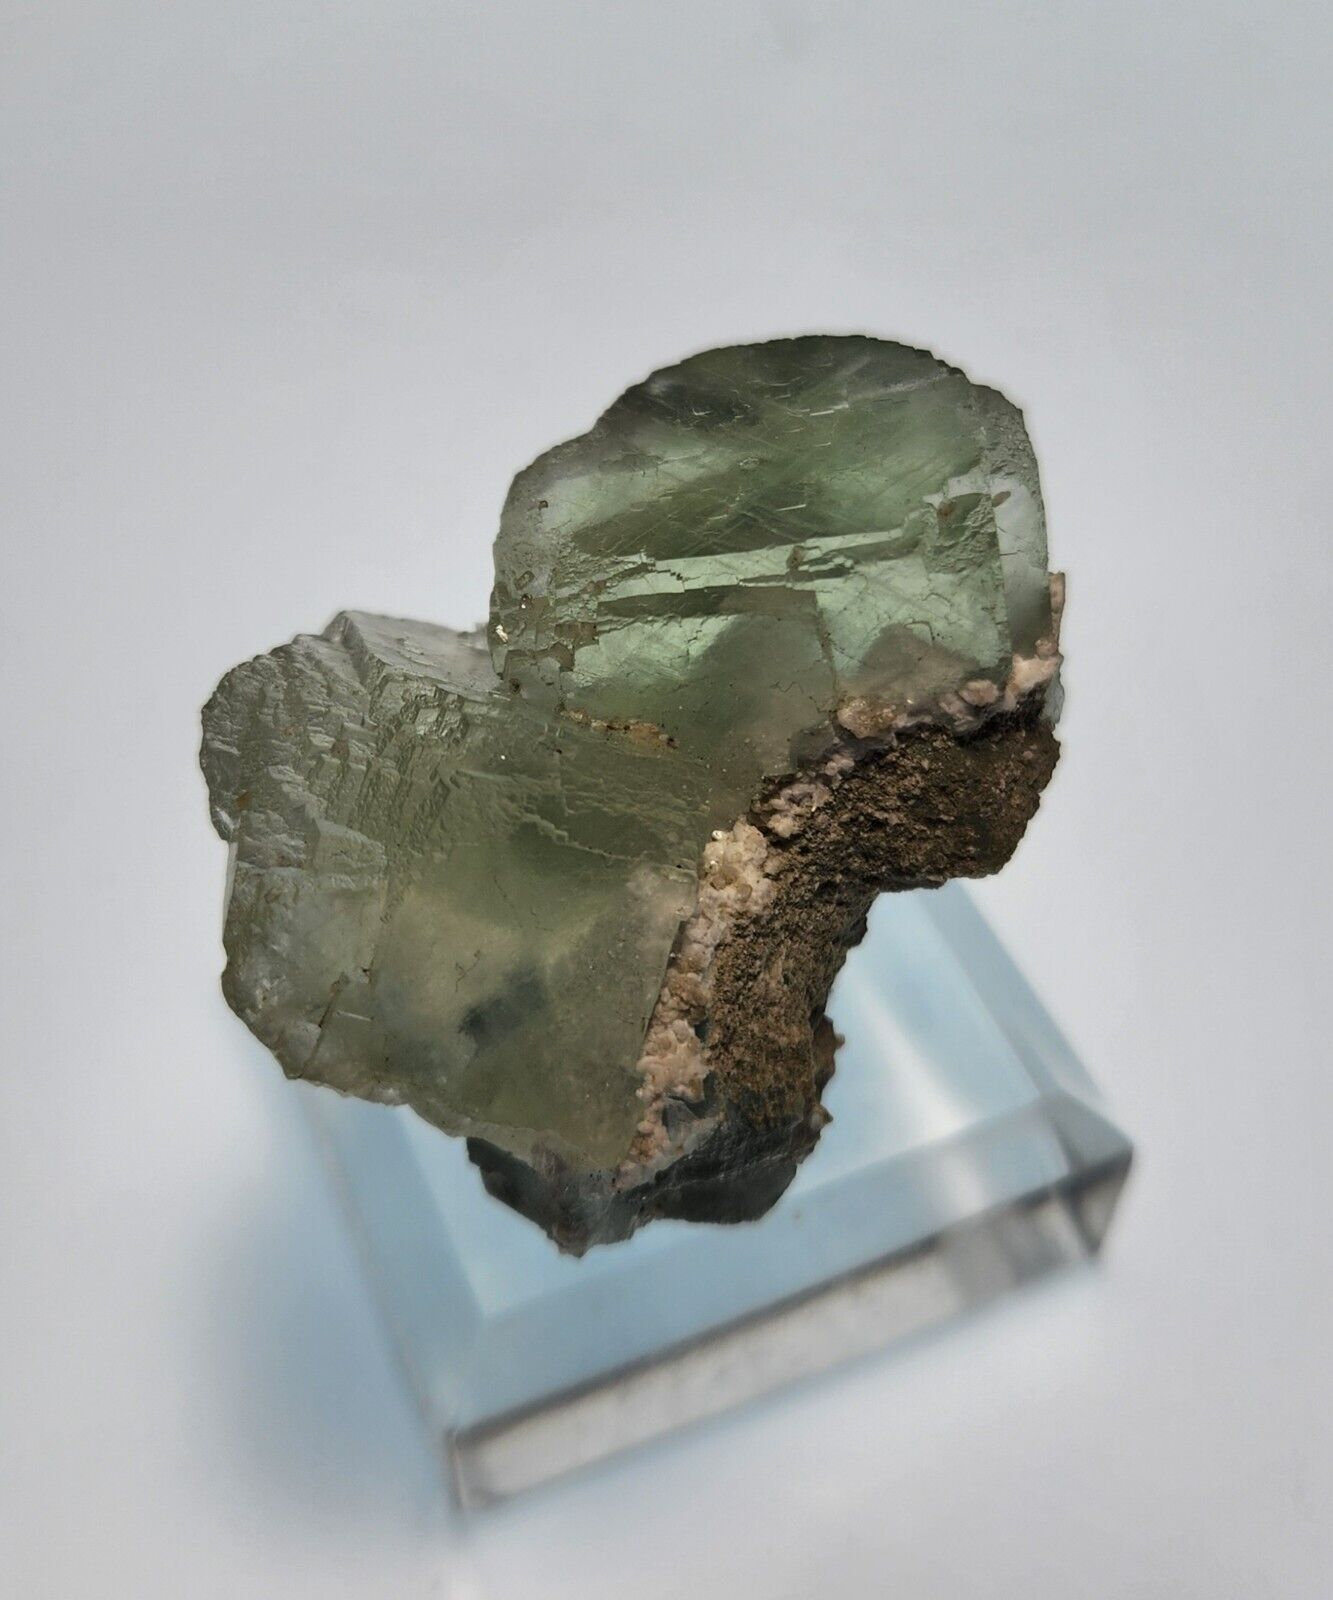 Lovely Mint Green Terminated Fluorite Cube Crystals on Matrix - Shangbao Mine